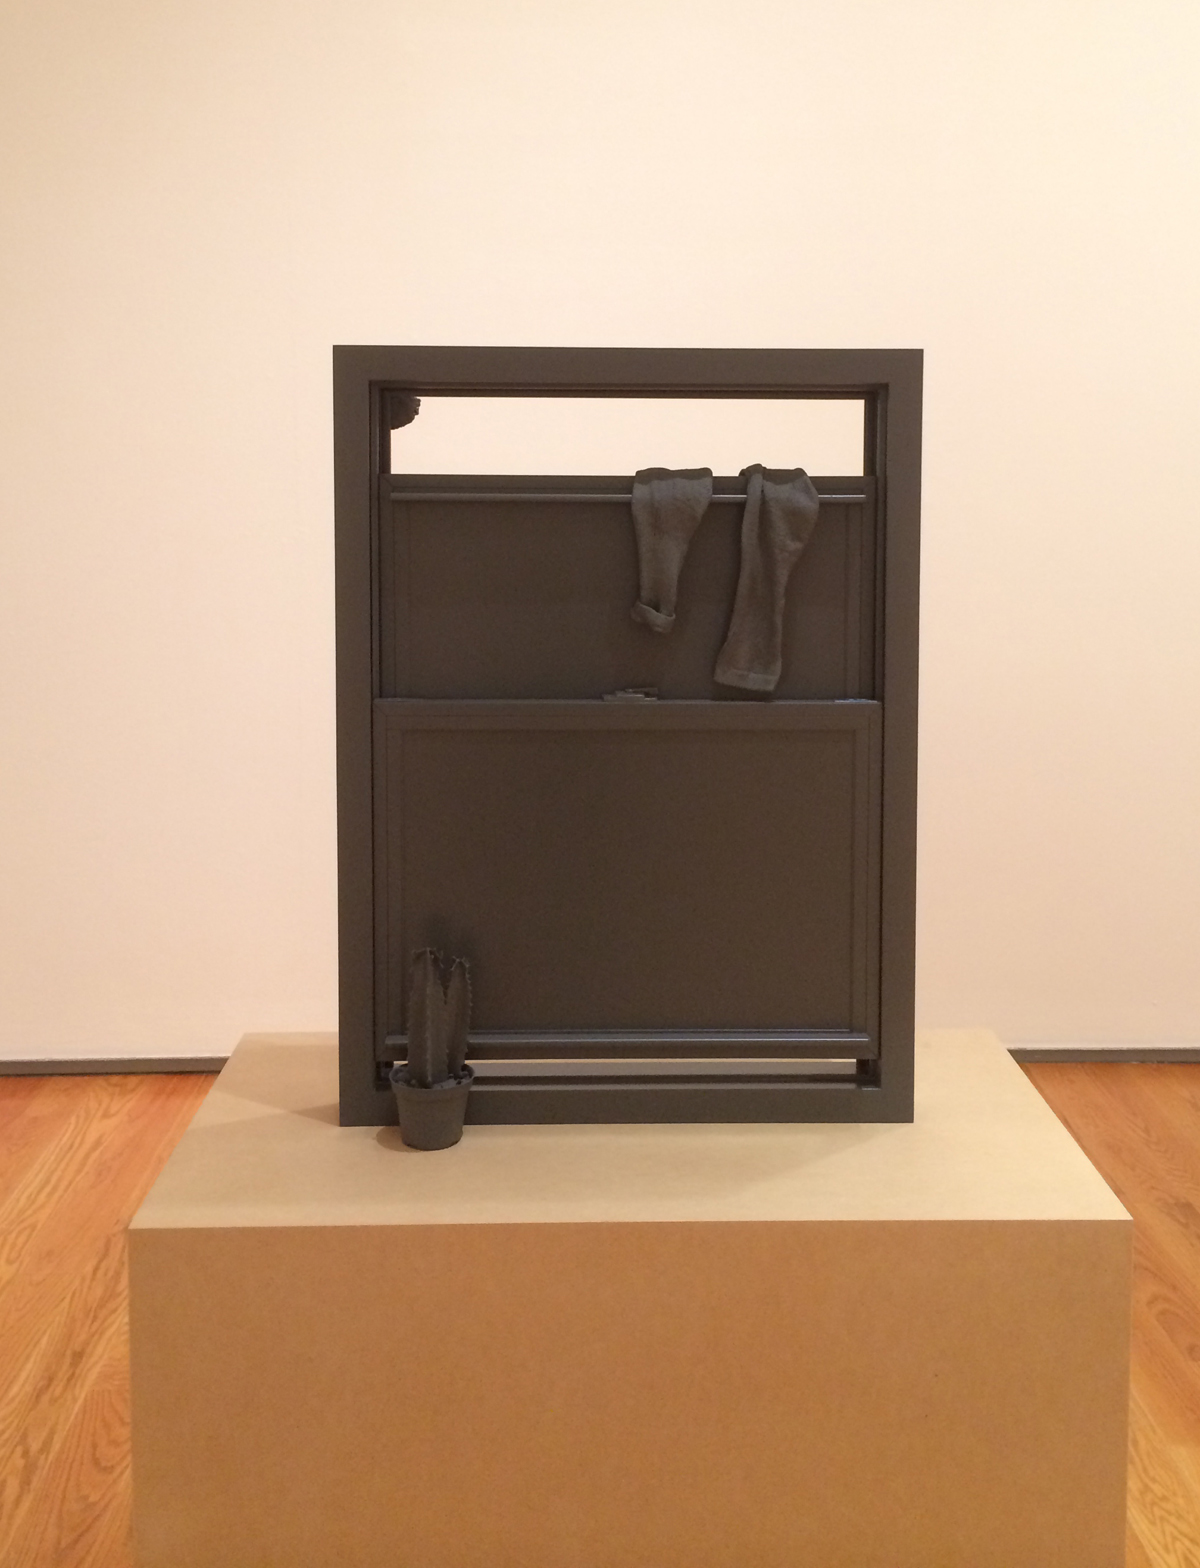 Window, 2012, painted stainless steel, bronze, 36 x 24 x 10